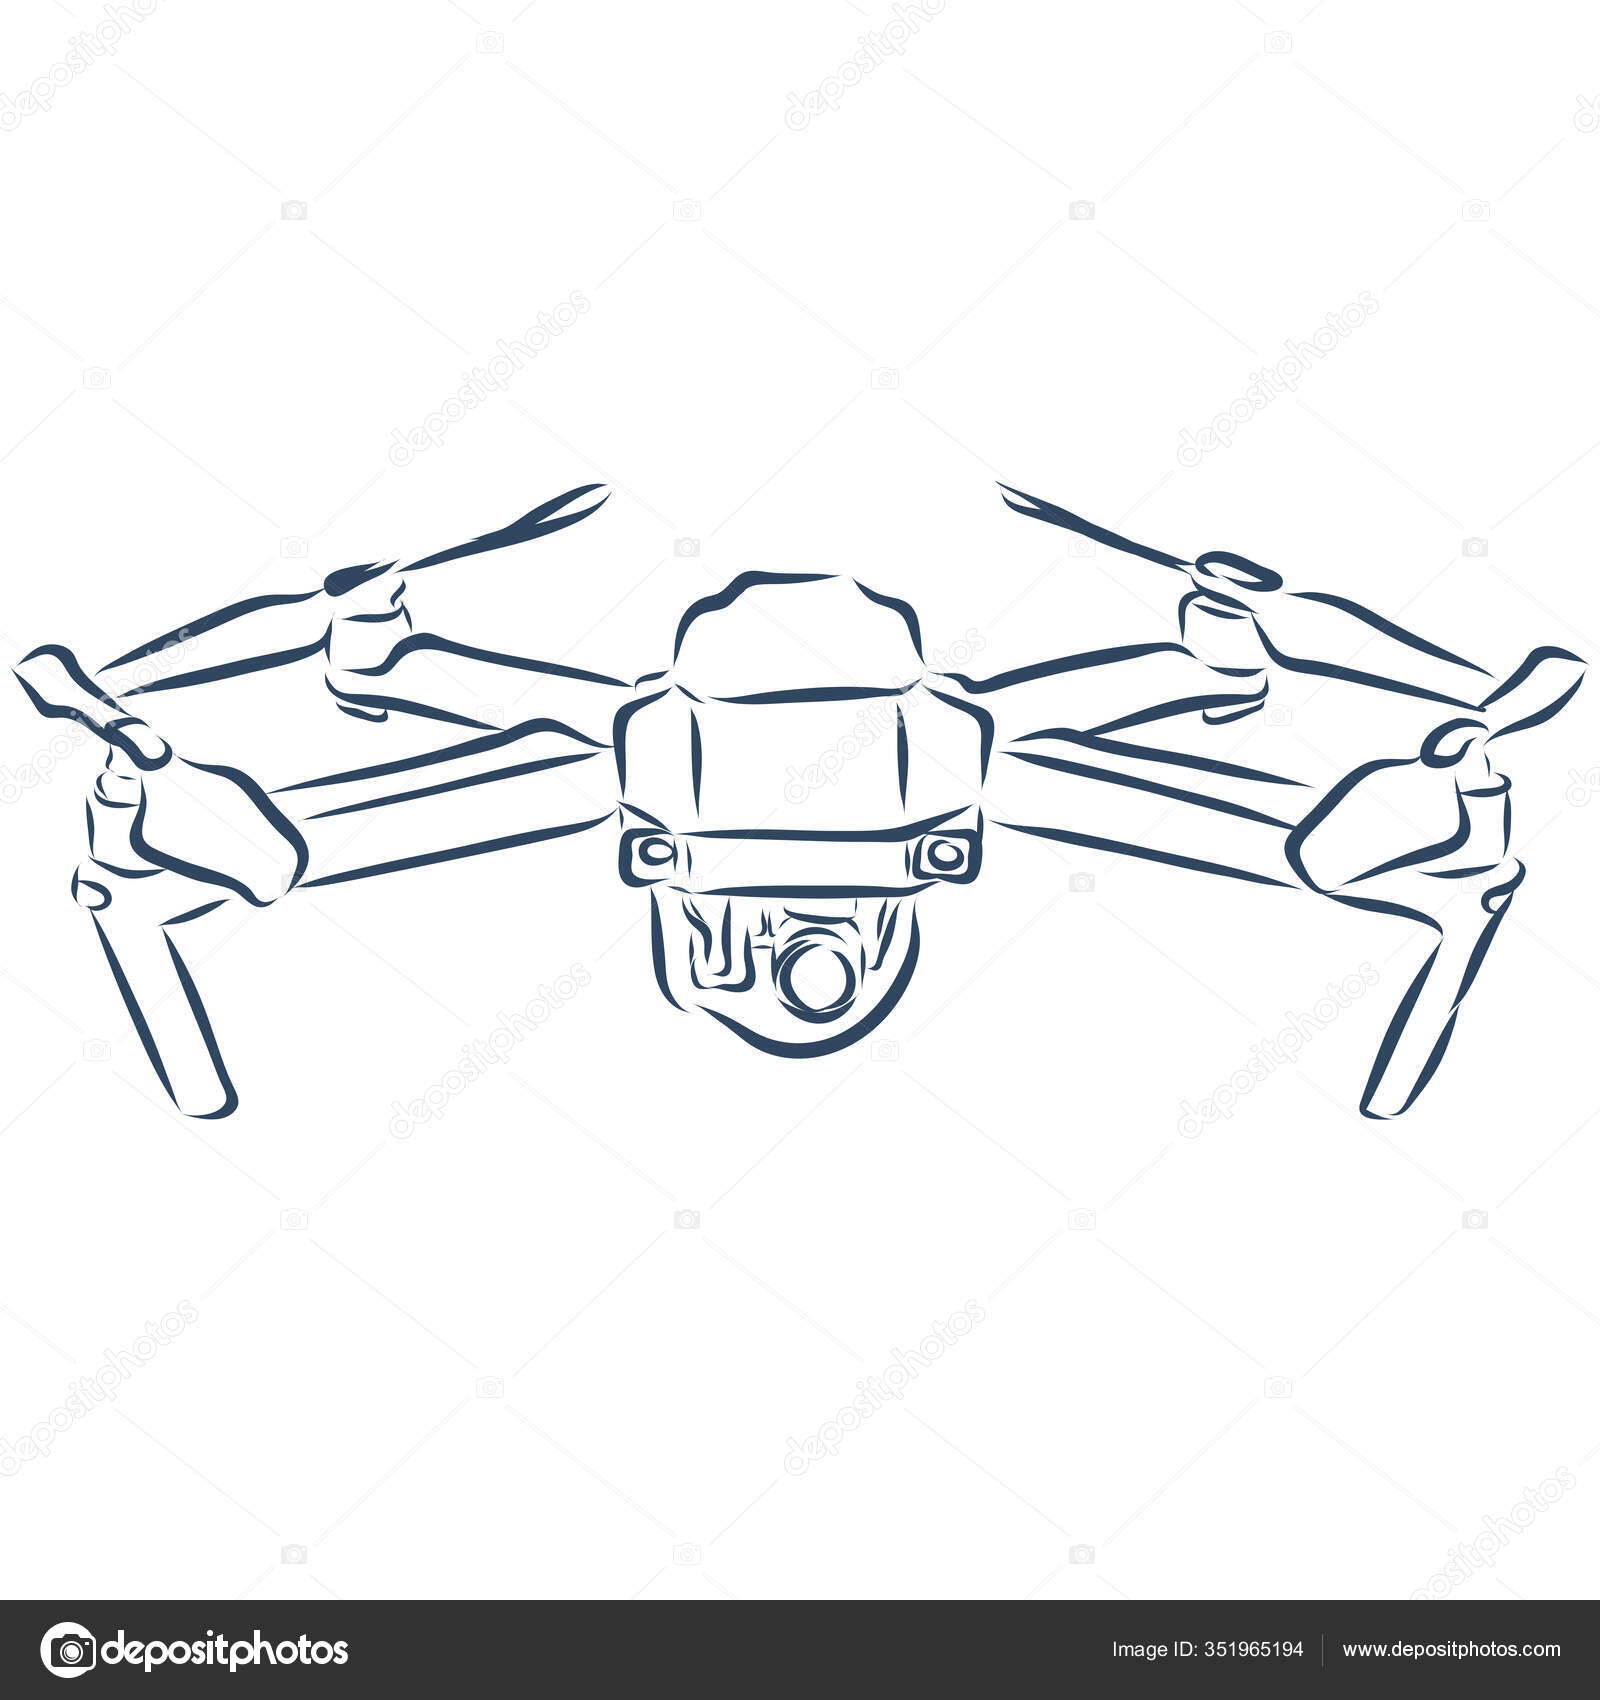 The Technical Drawing of the UAV  Download Scientific Diagram